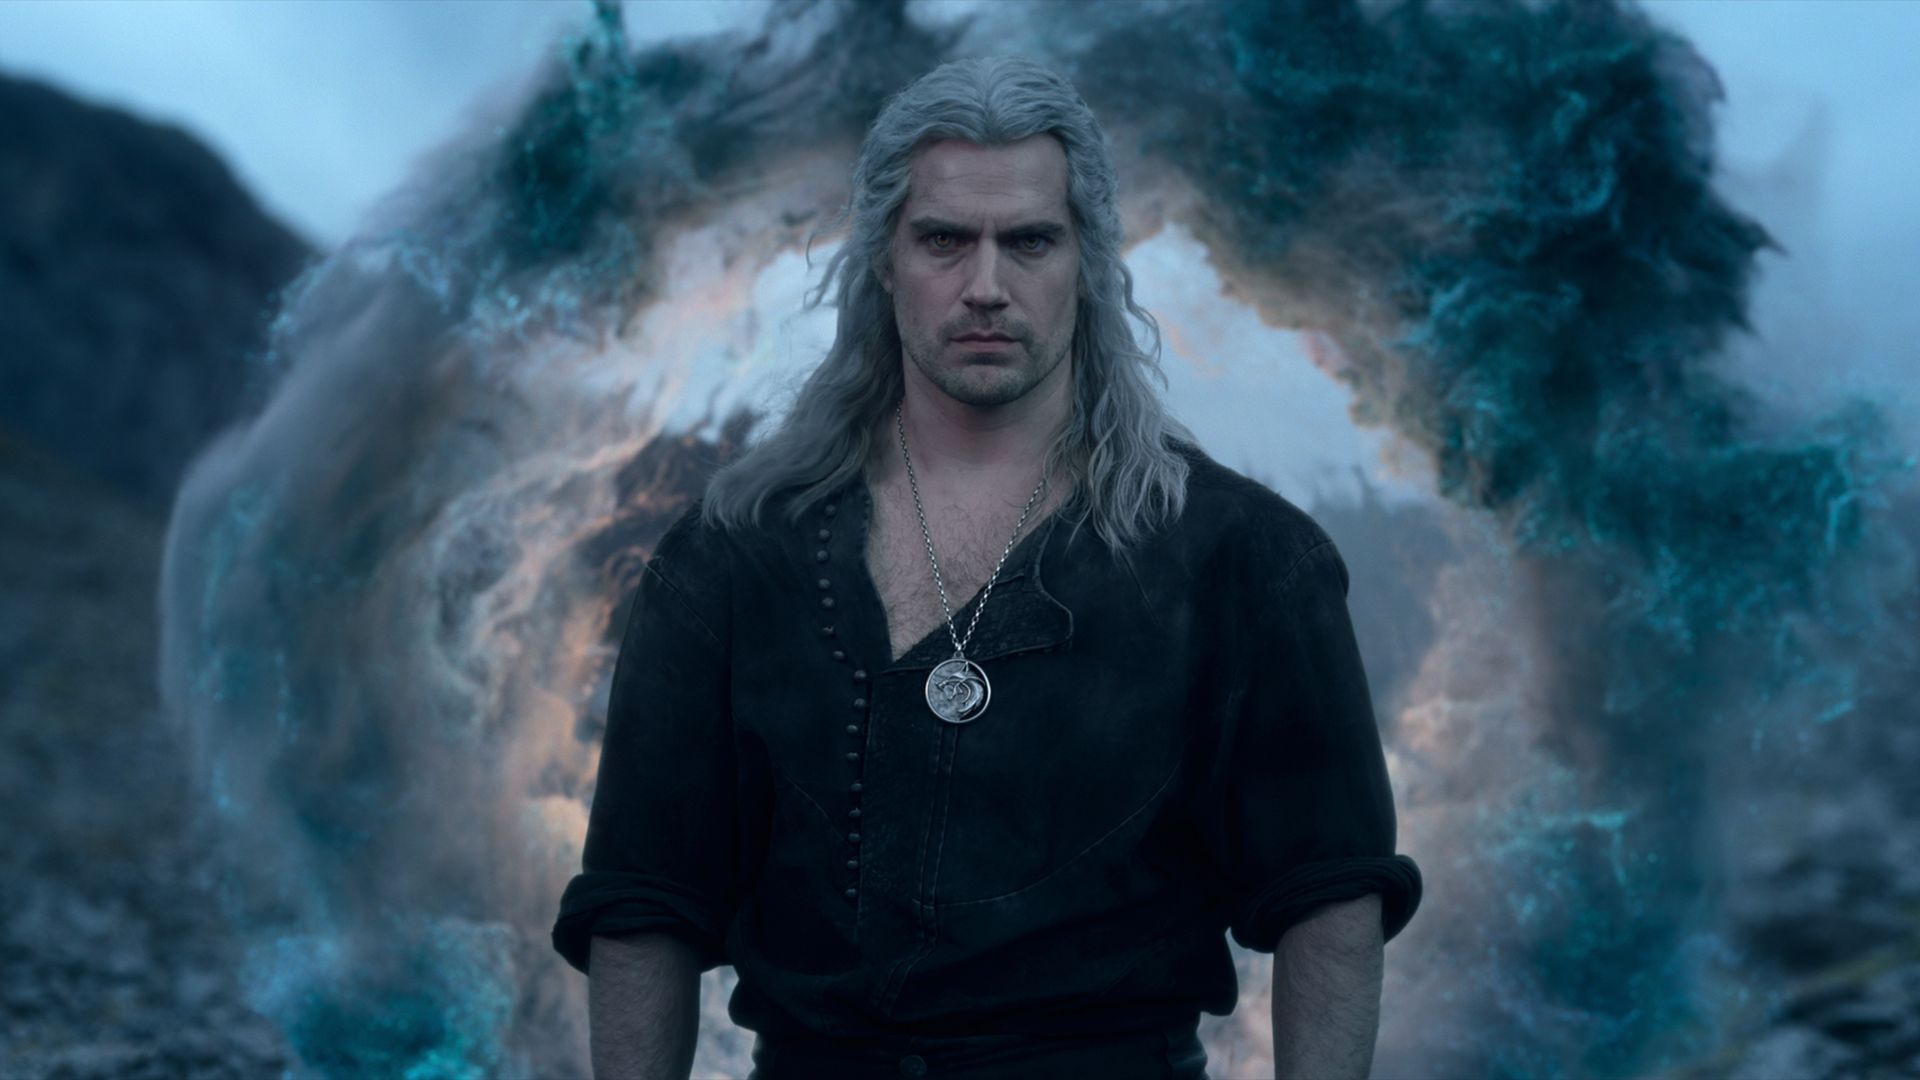 Netflix's The Witcher ending after Henry Cavill recasting - details